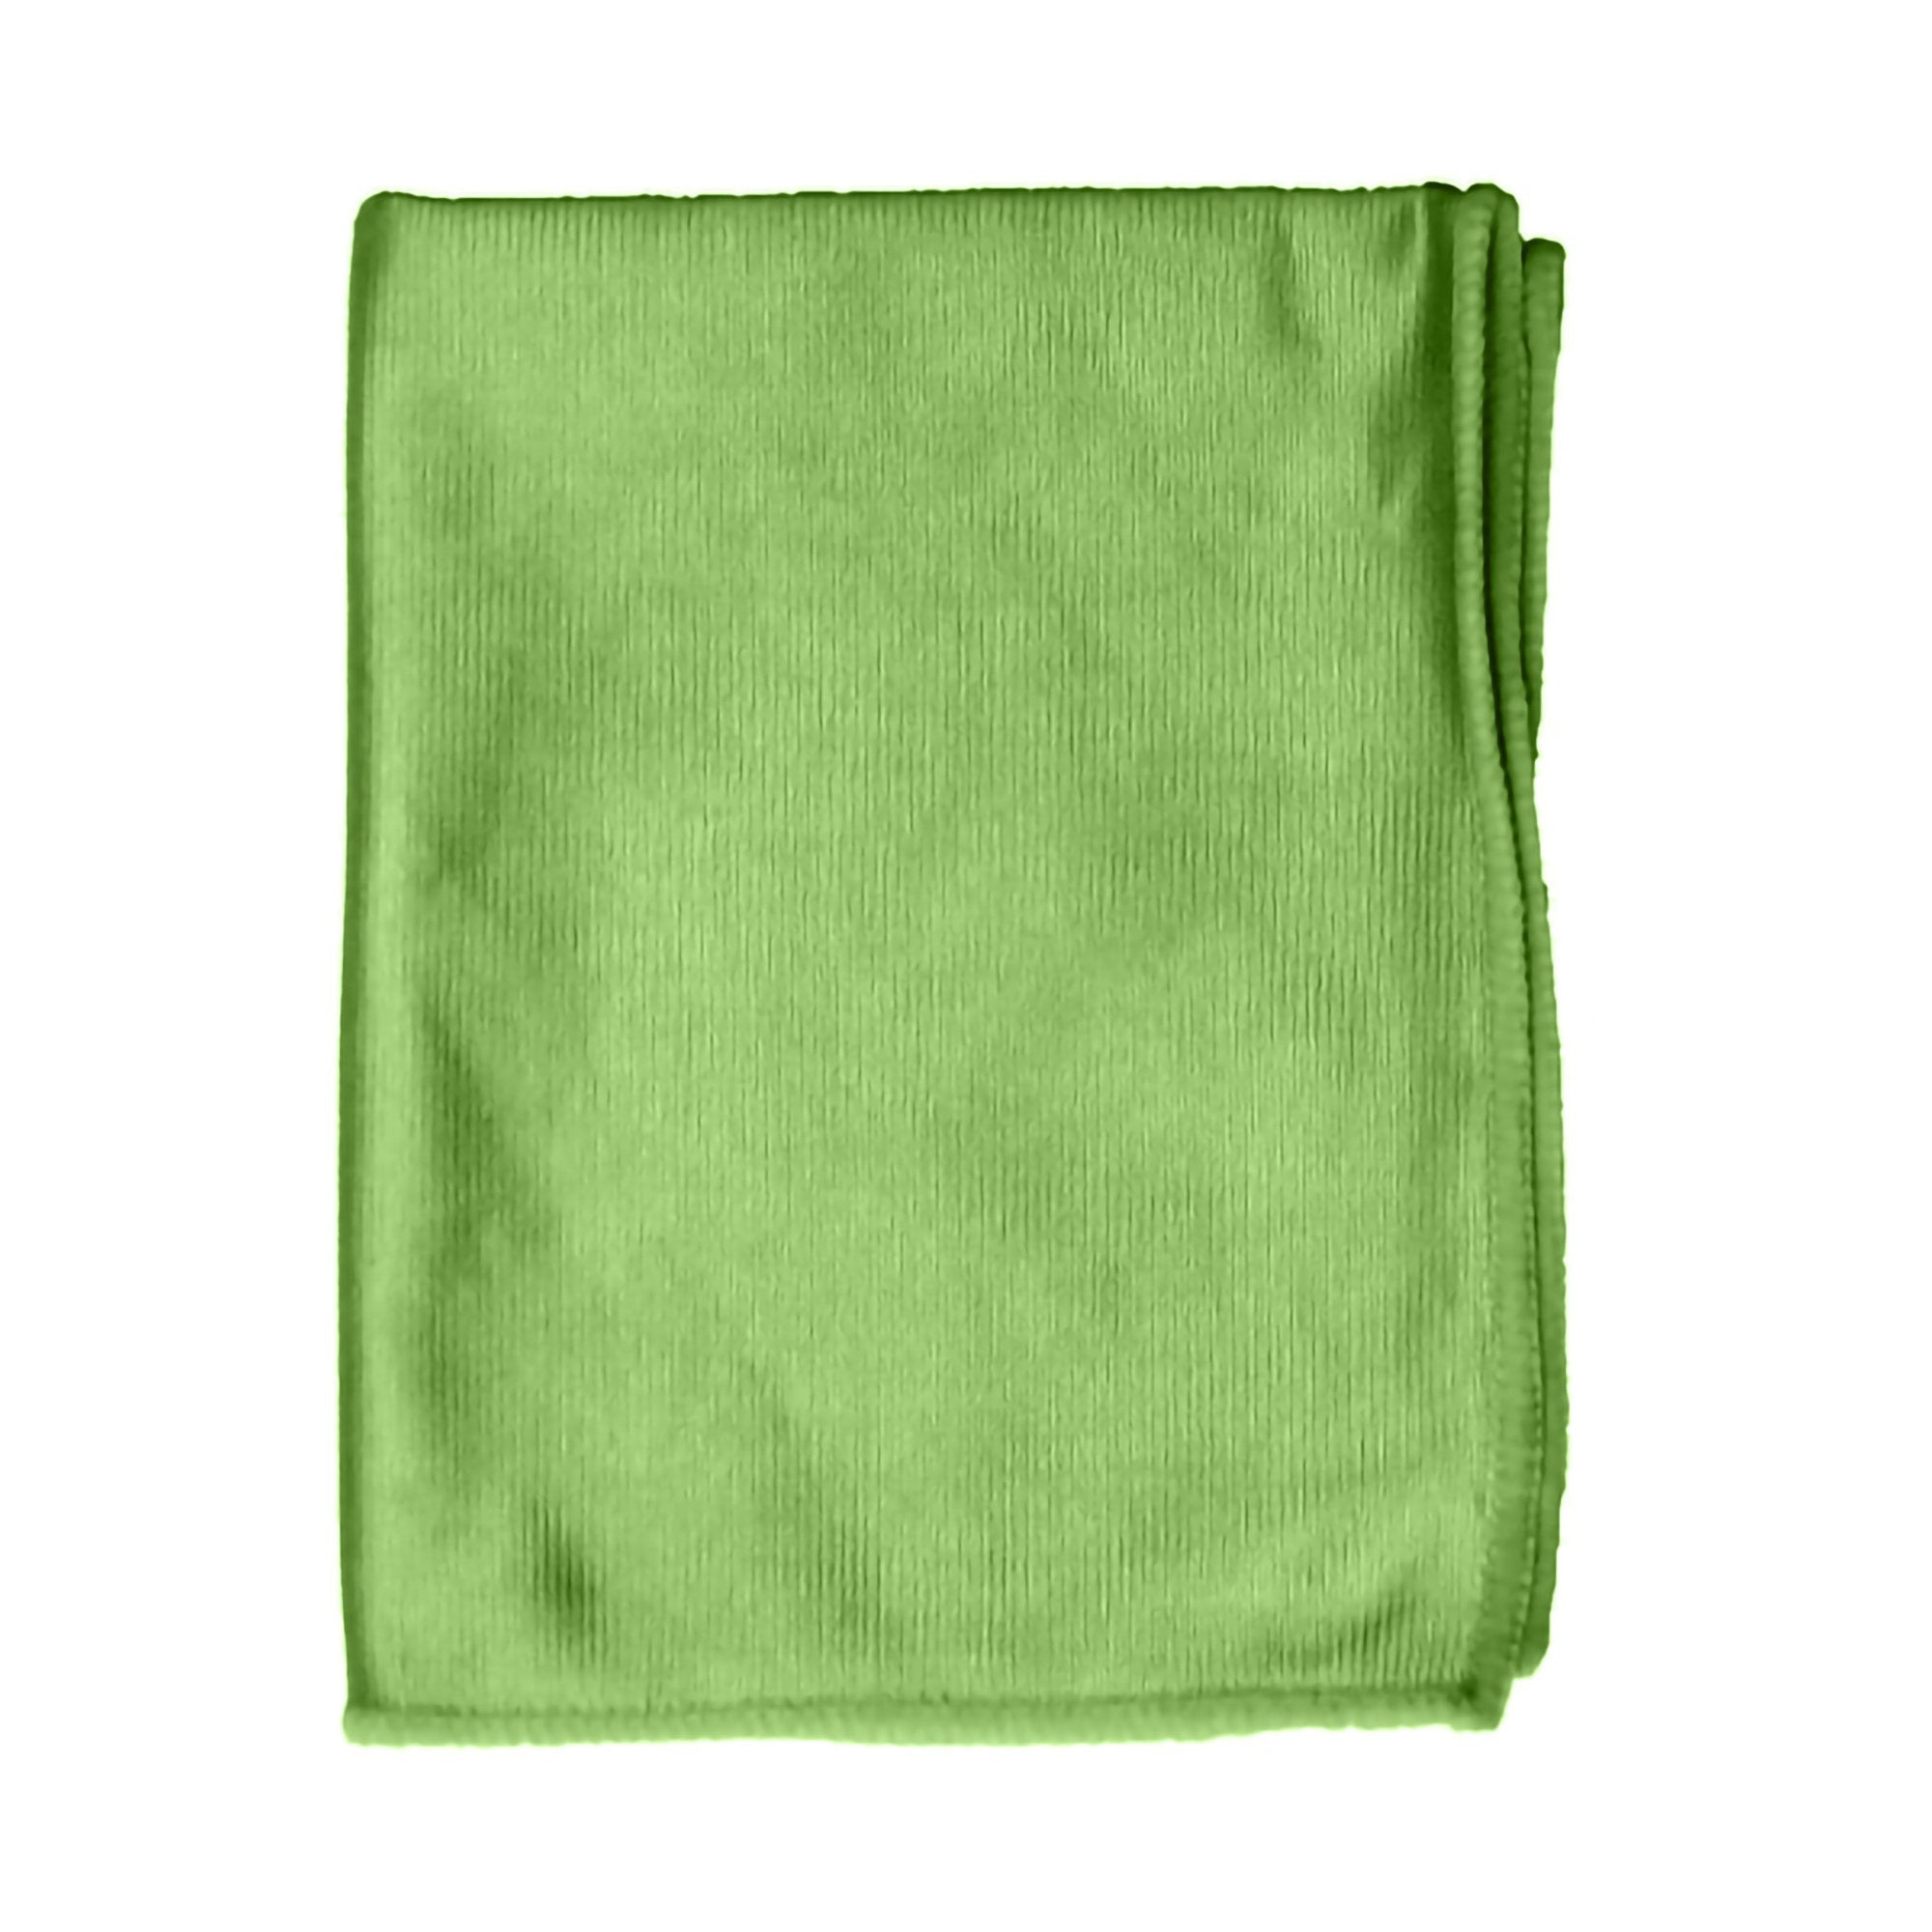 Cleaning Cloth O'Dell® Medium Duty Green NonSterile Microfiber 16 X 16 Inch Reusable